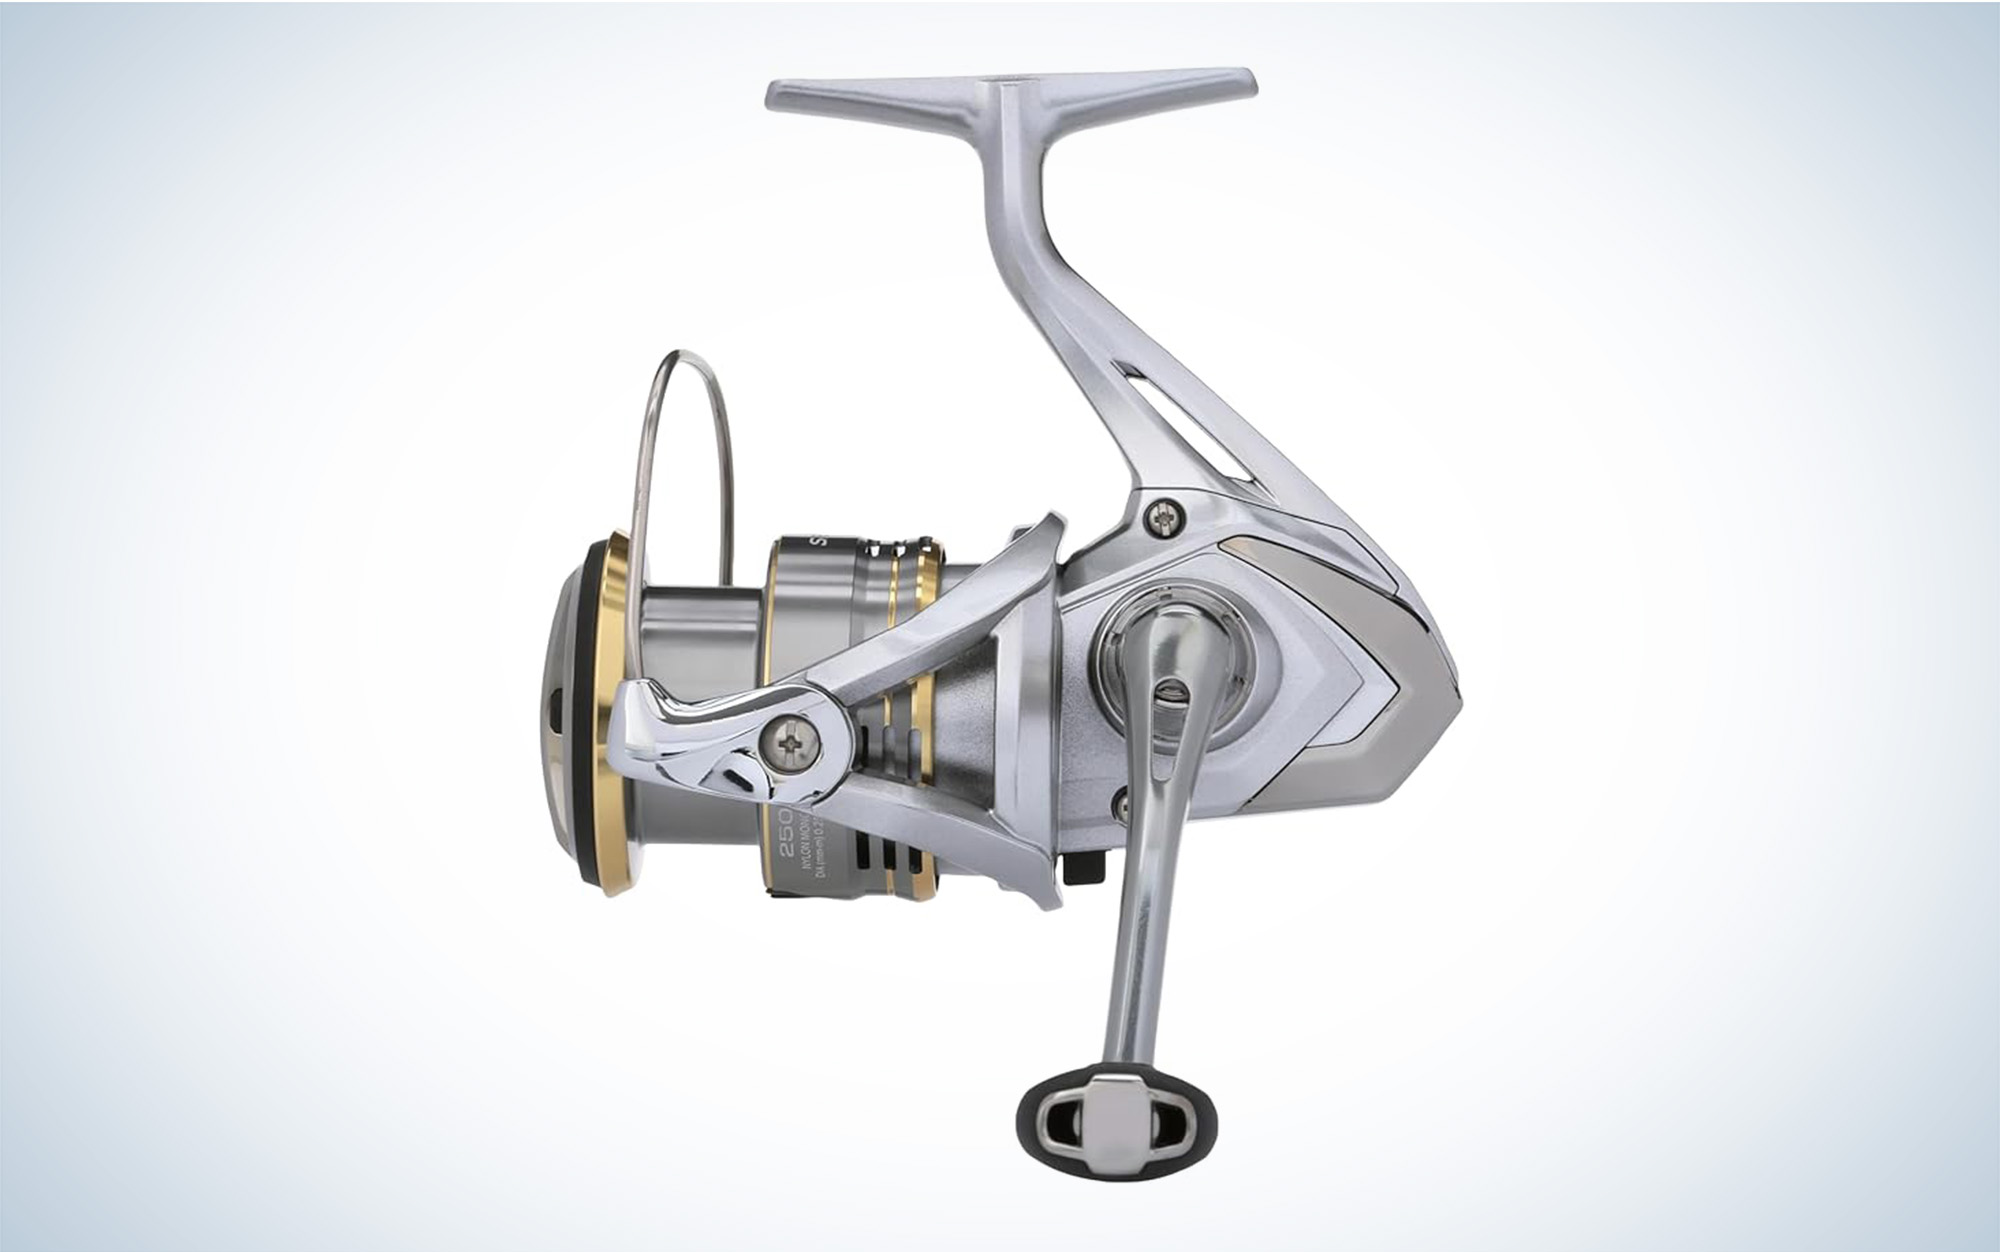 The Top 5 Spinning Reels Under $100! 2024 Buying Guide 